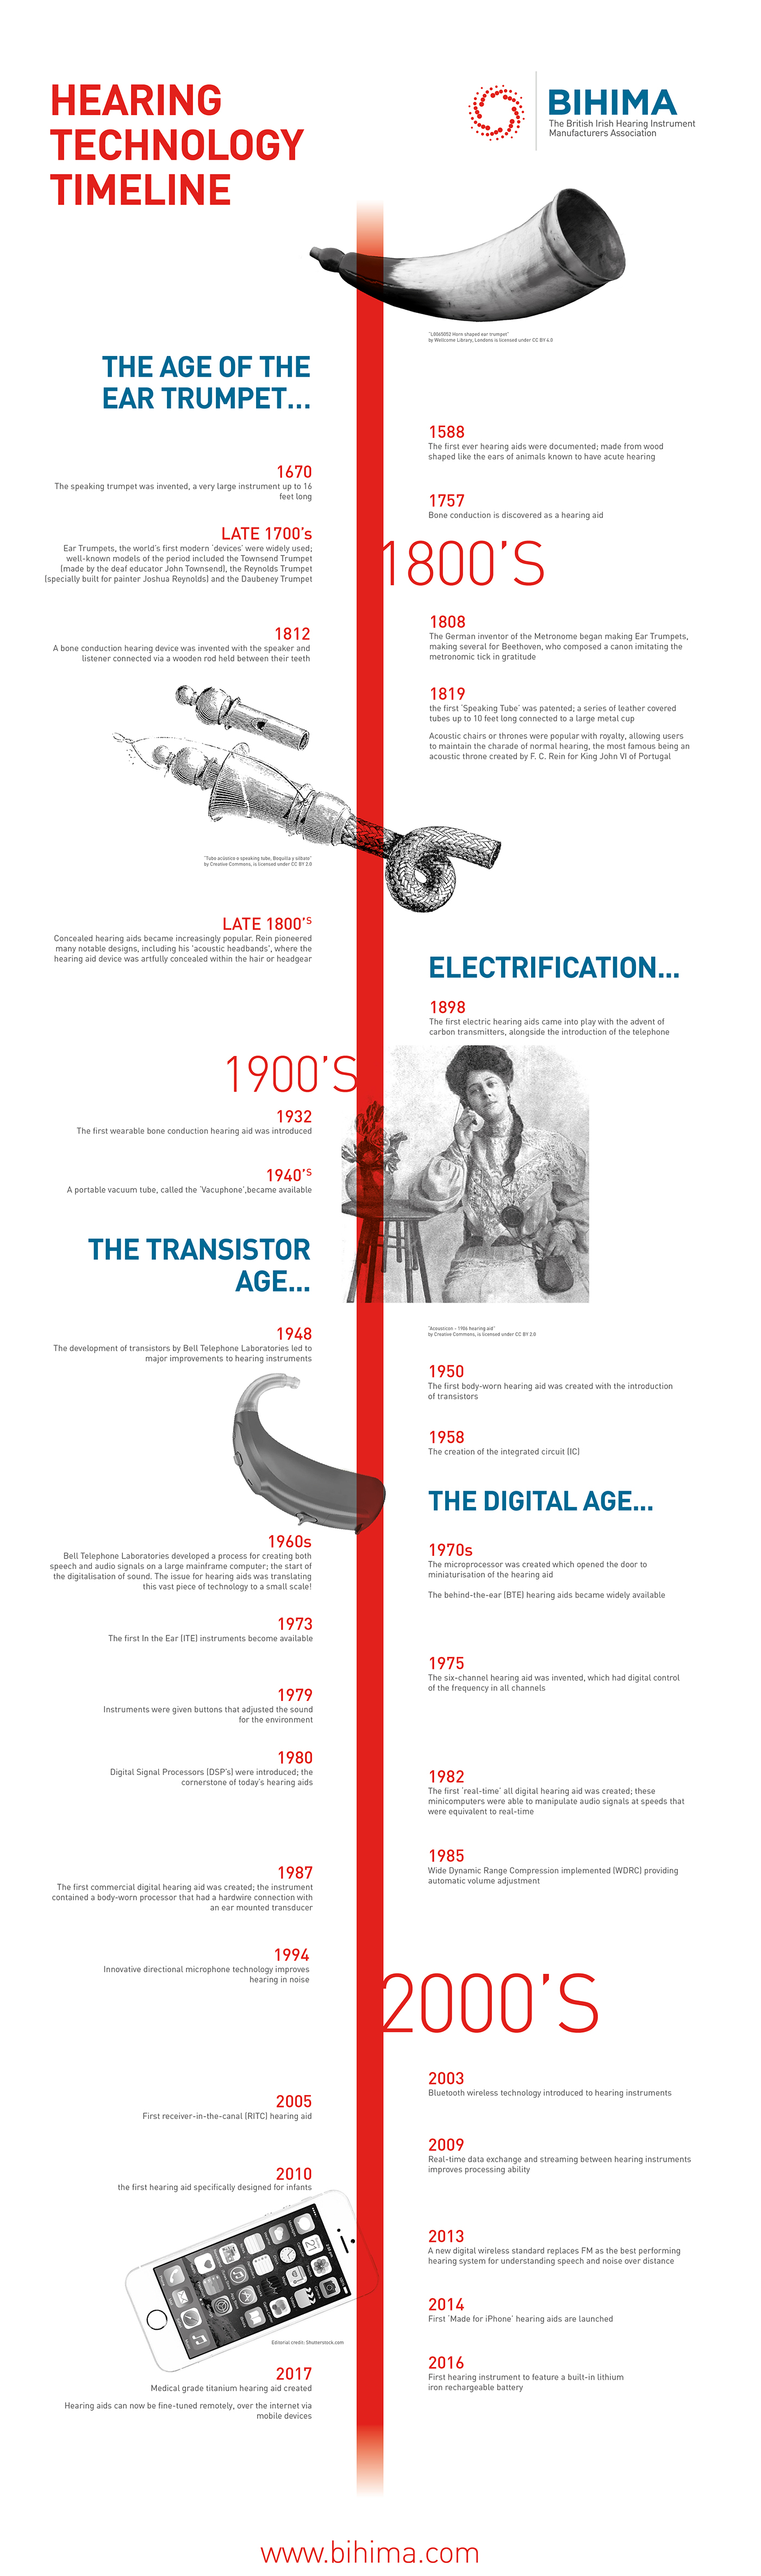 Hearing Technology Timeline